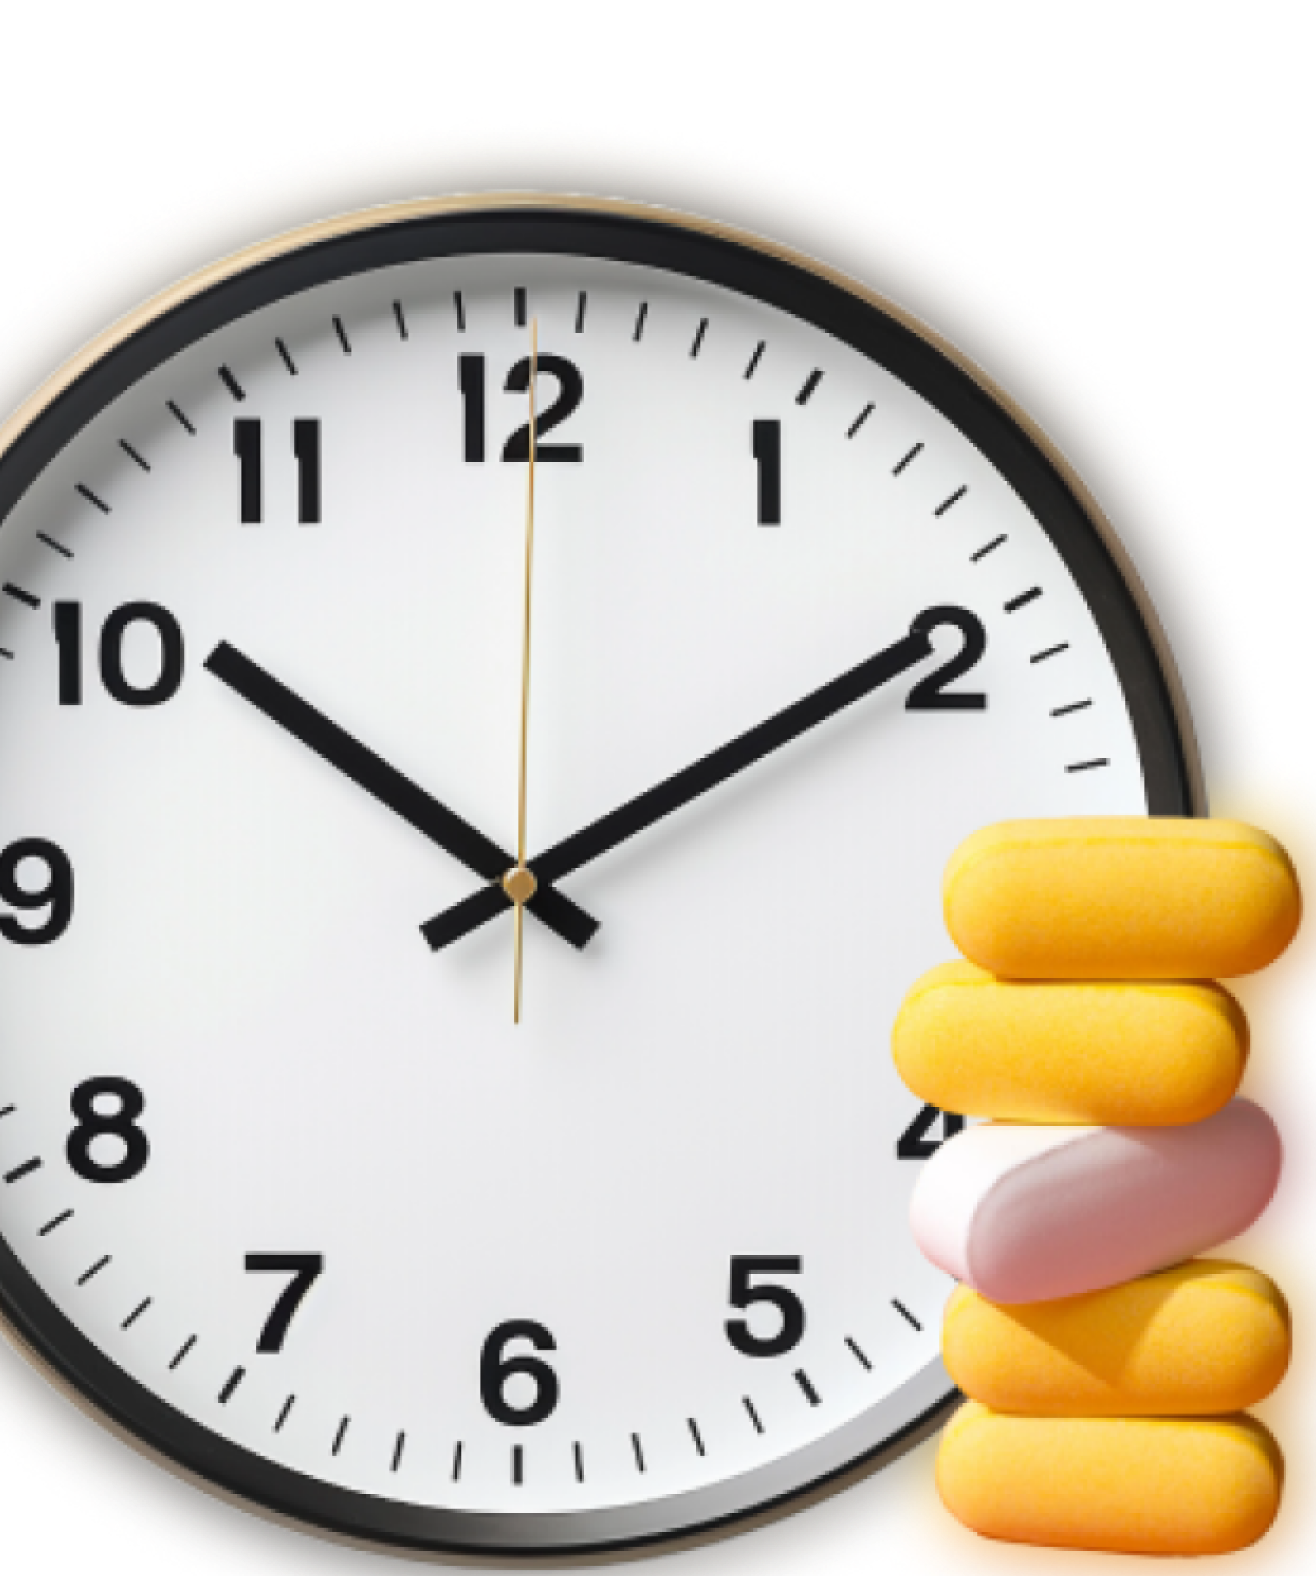 A round wall clock shows the time as 2:11. A yellow gloved hand is partially visible, holding the clock on the right side.